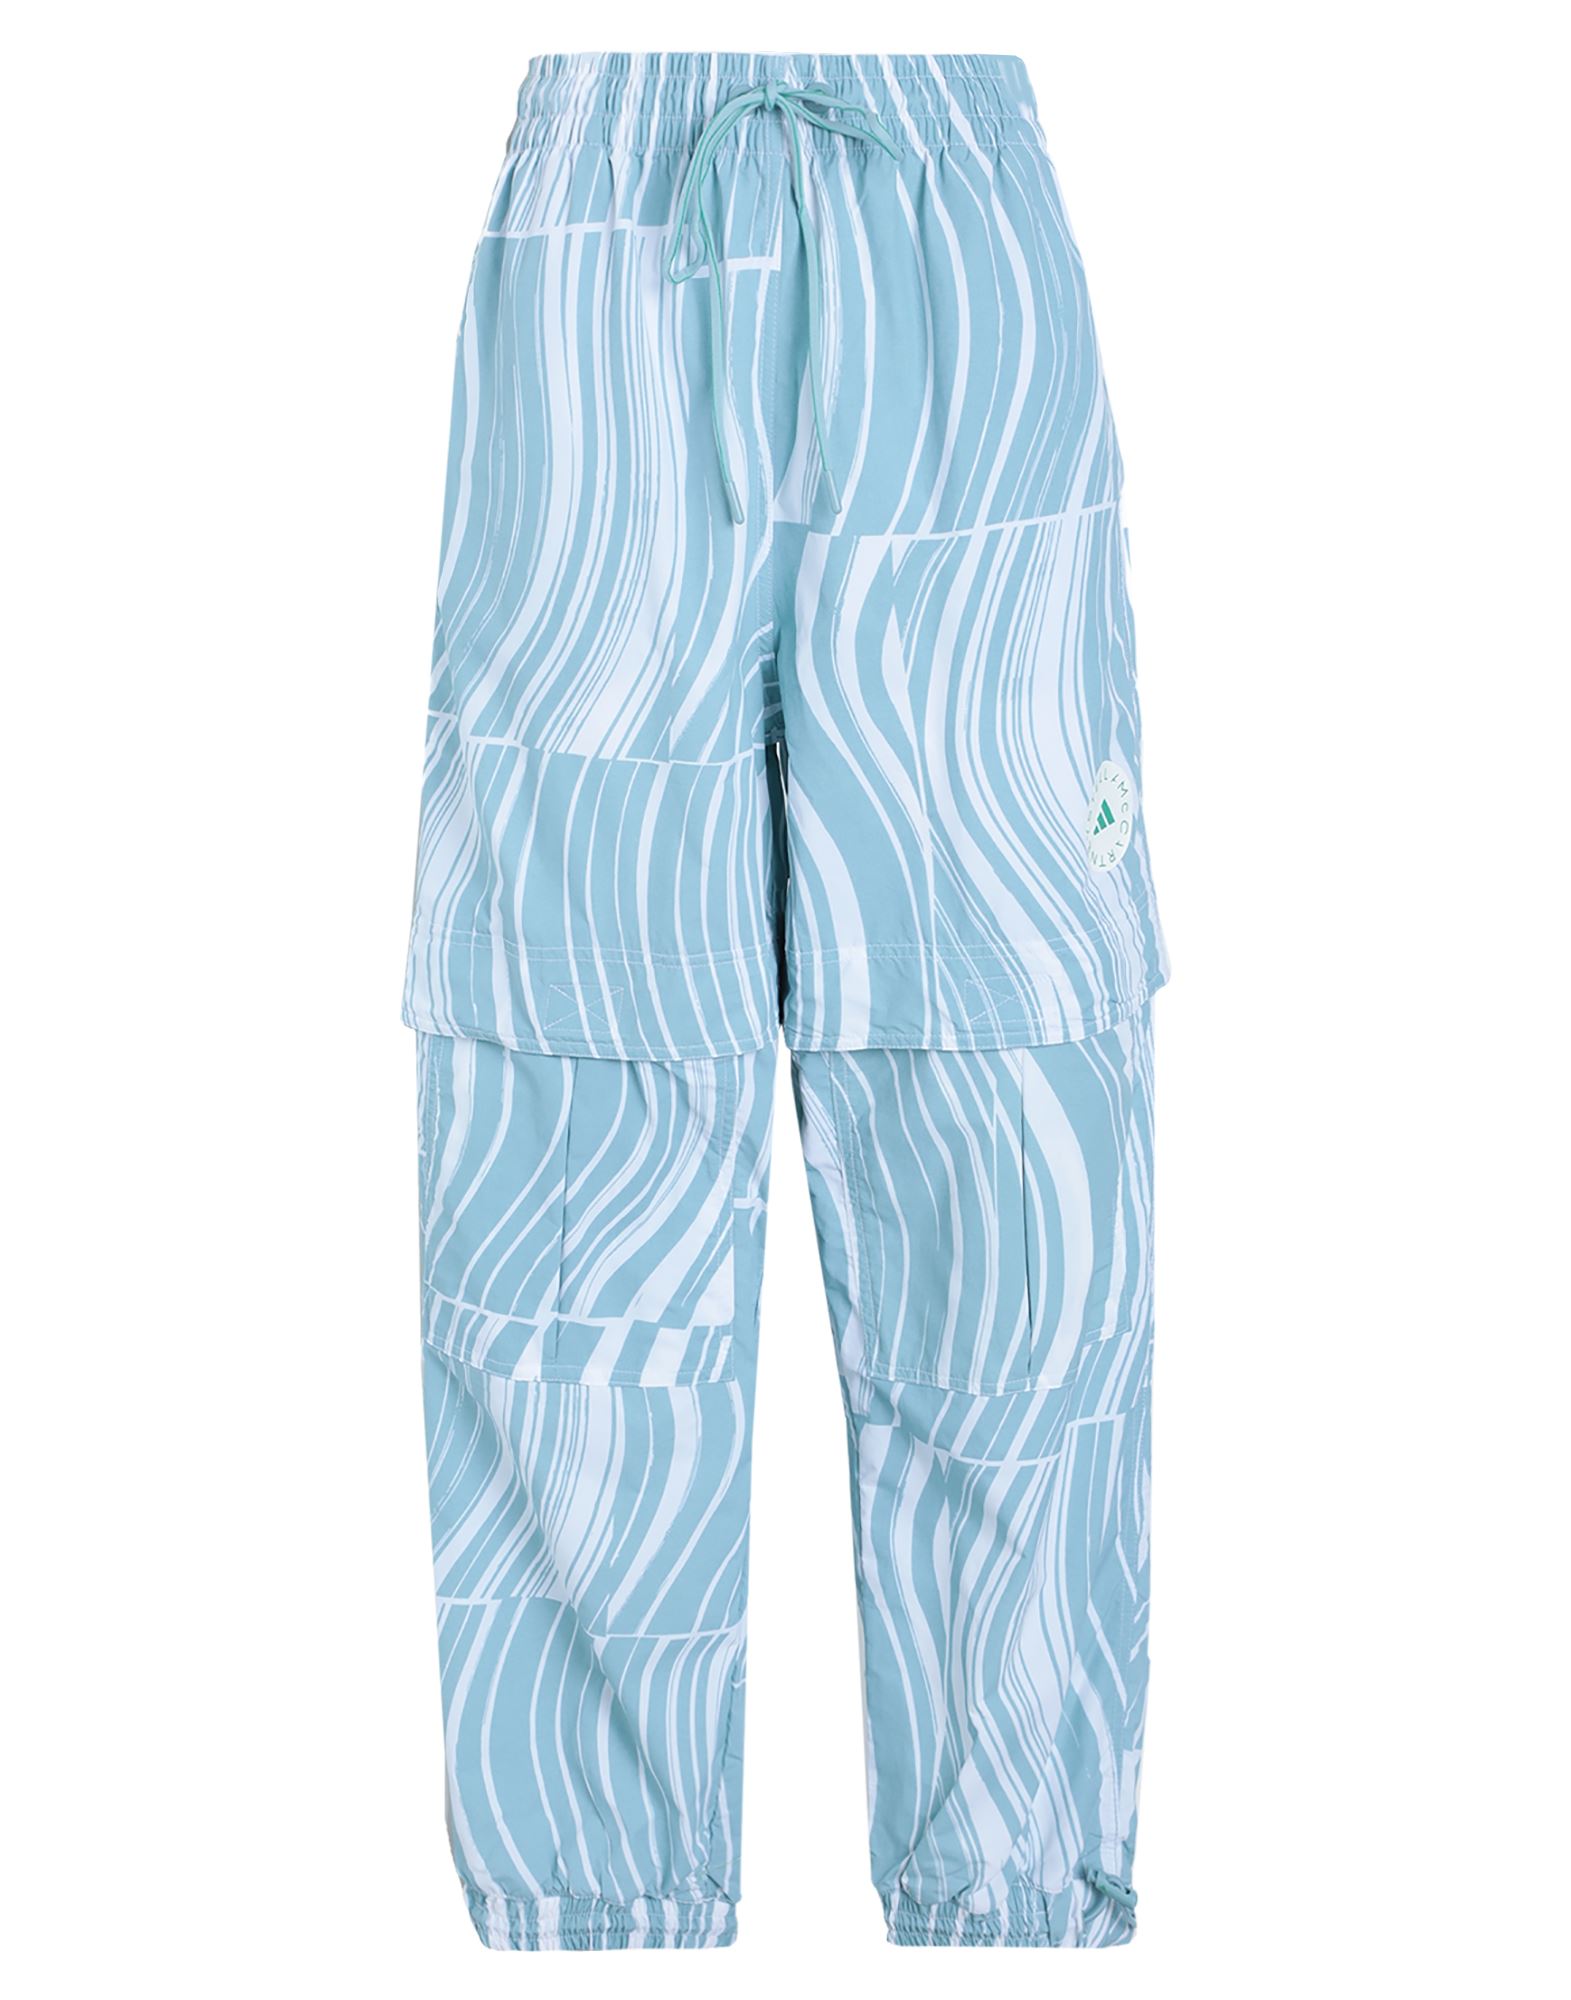 Adidas By Stella Mccartney Truecasuals Woven Trackpant Printed Woman Pant In Blue